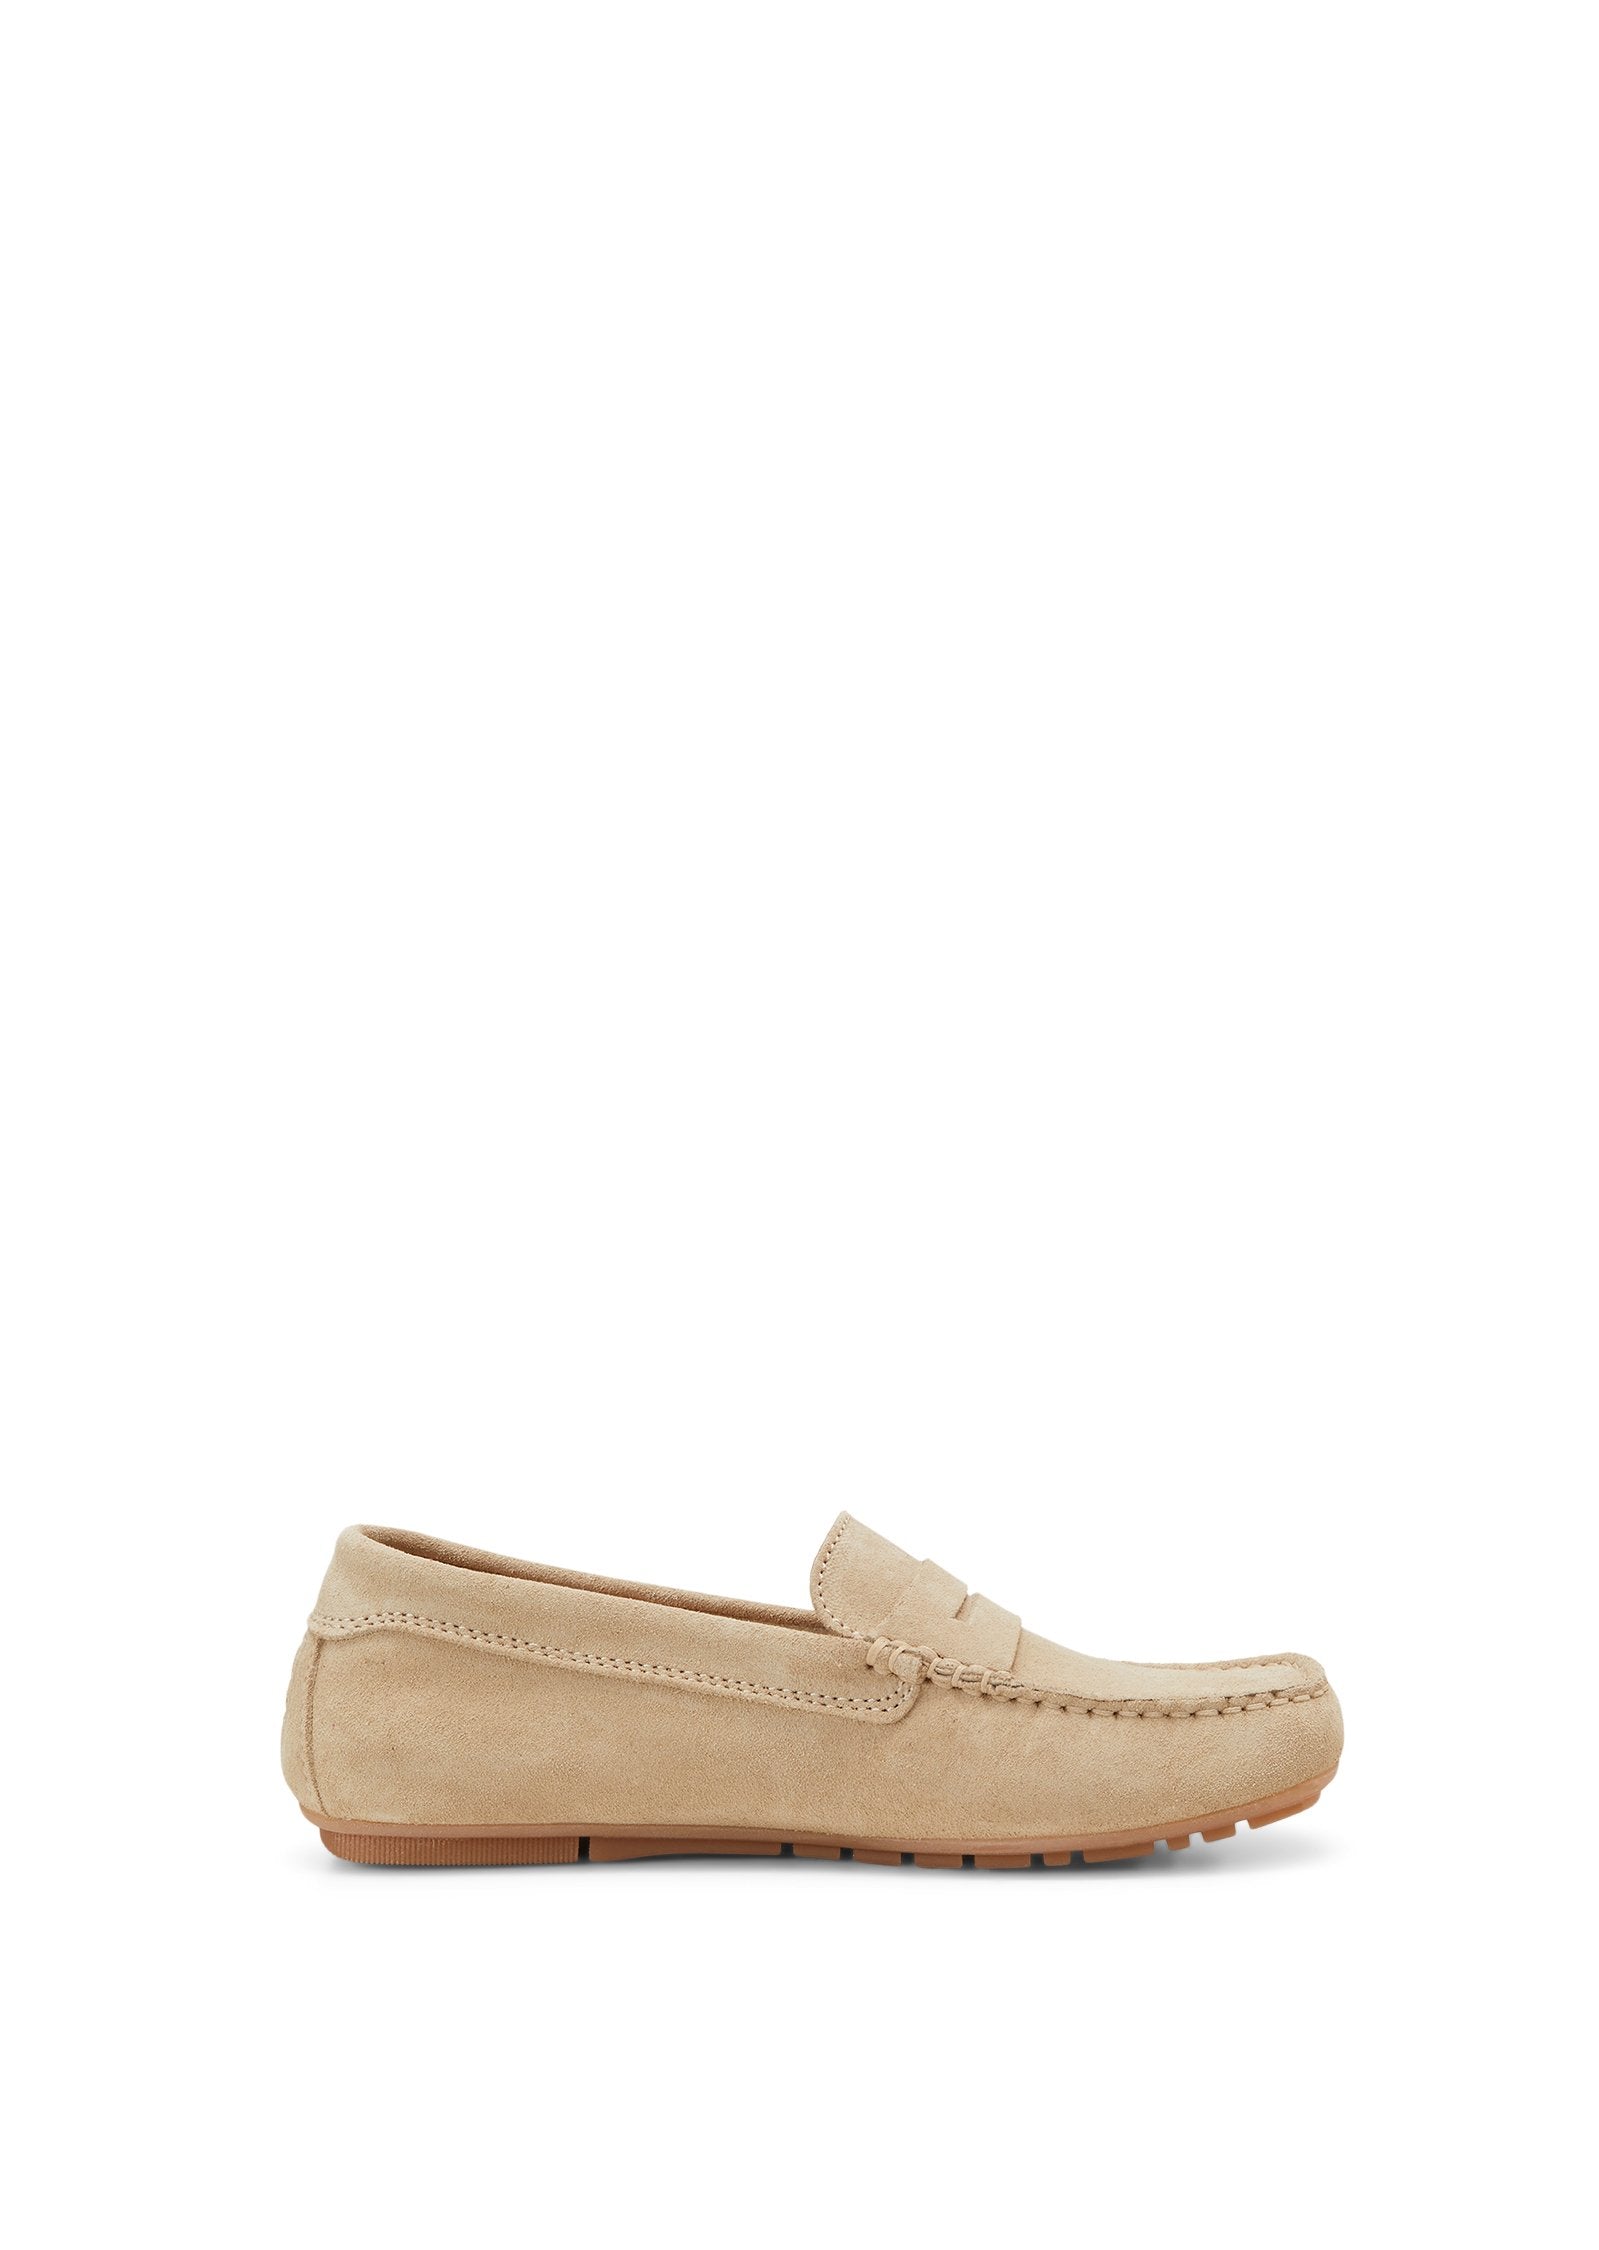 Moccasin (Sand)